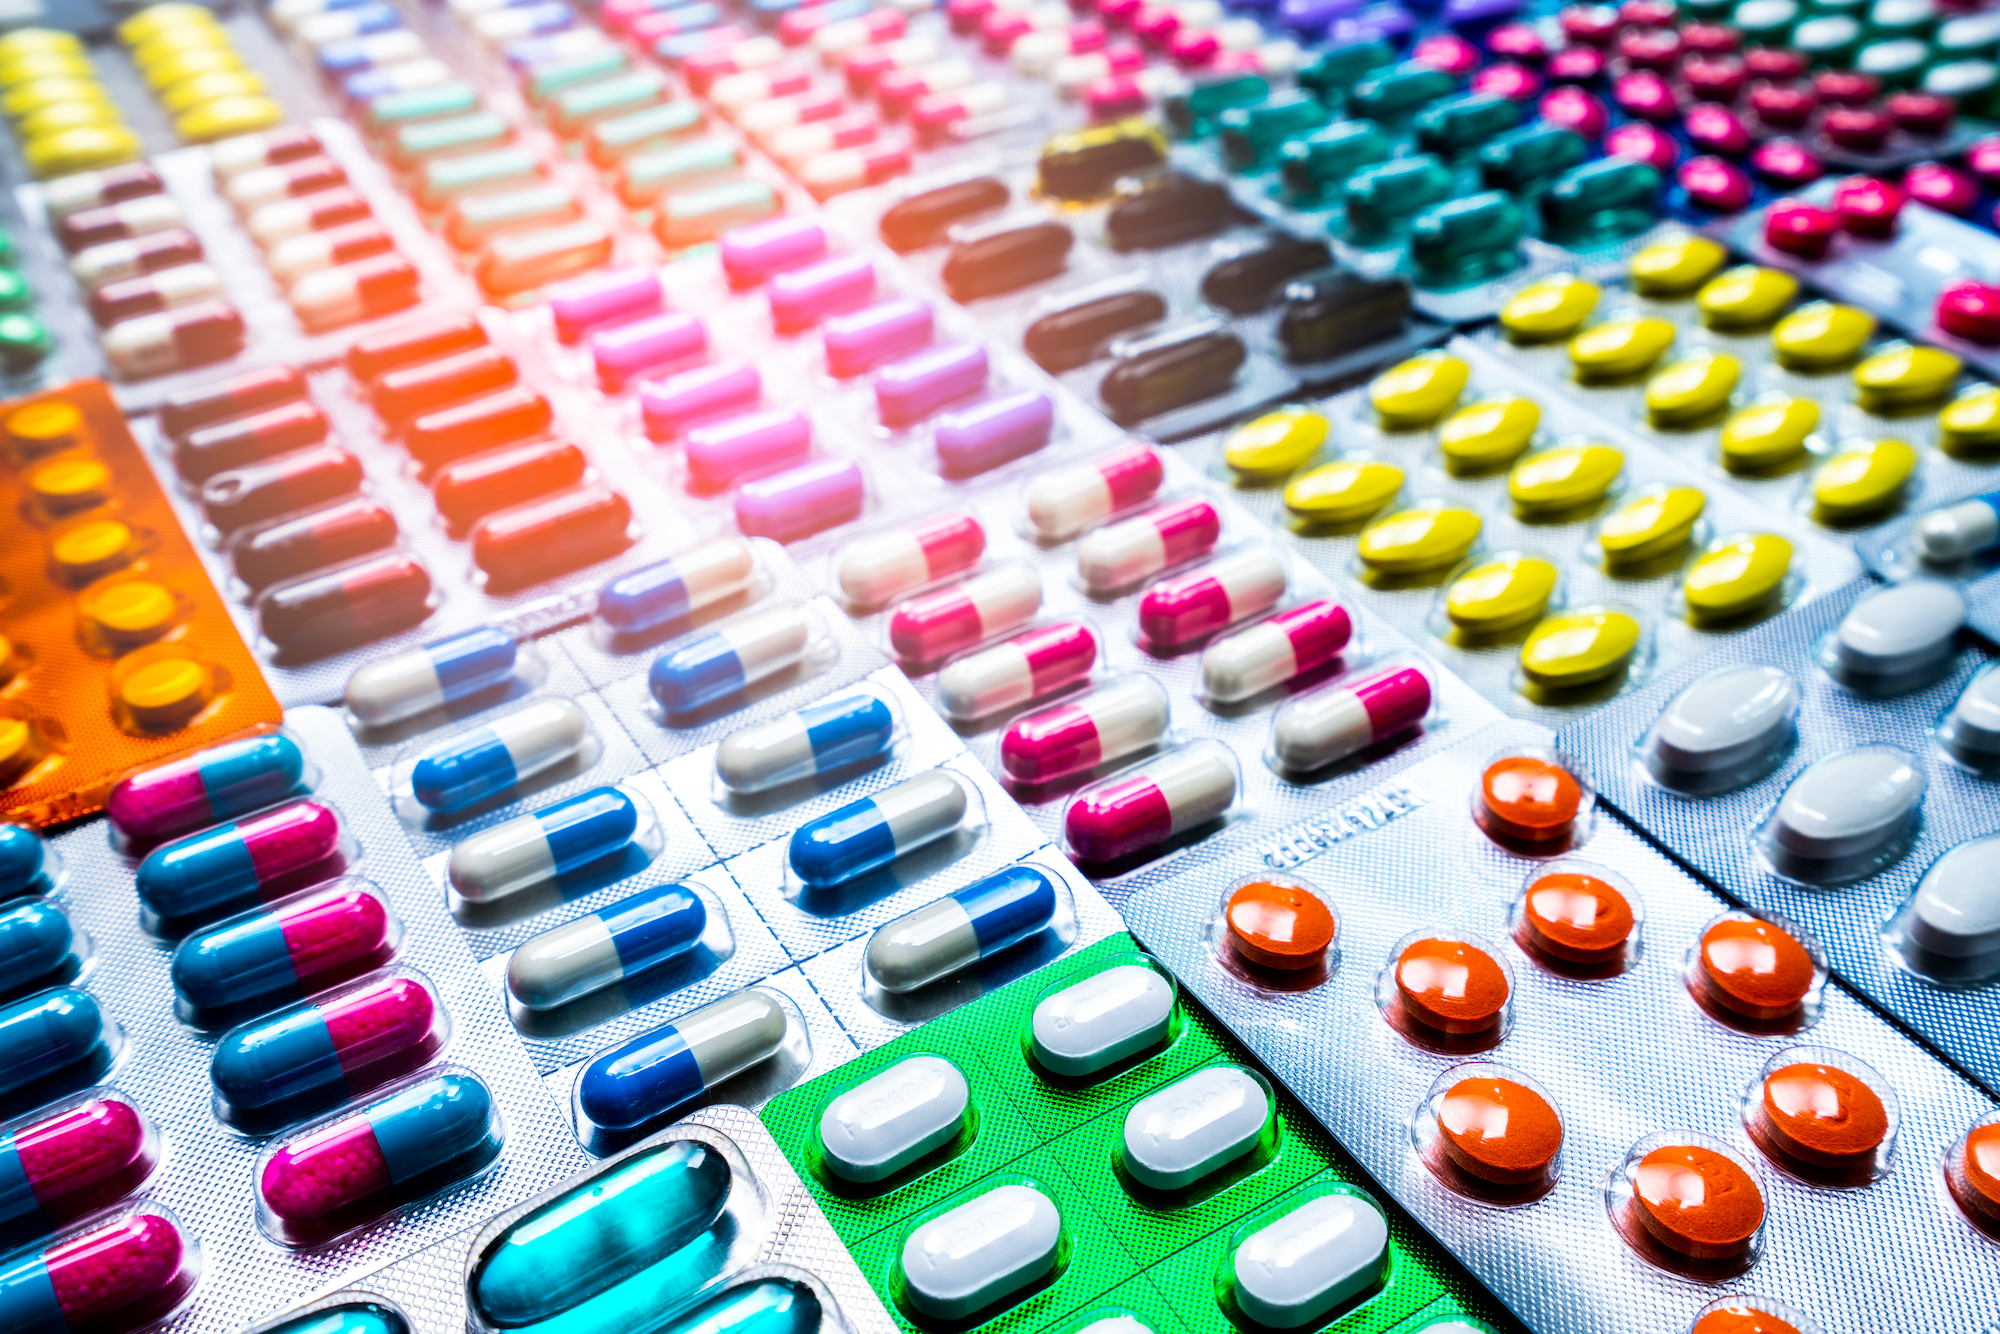 Rows of blister packs containing colorful pills and tablets fill the frame.